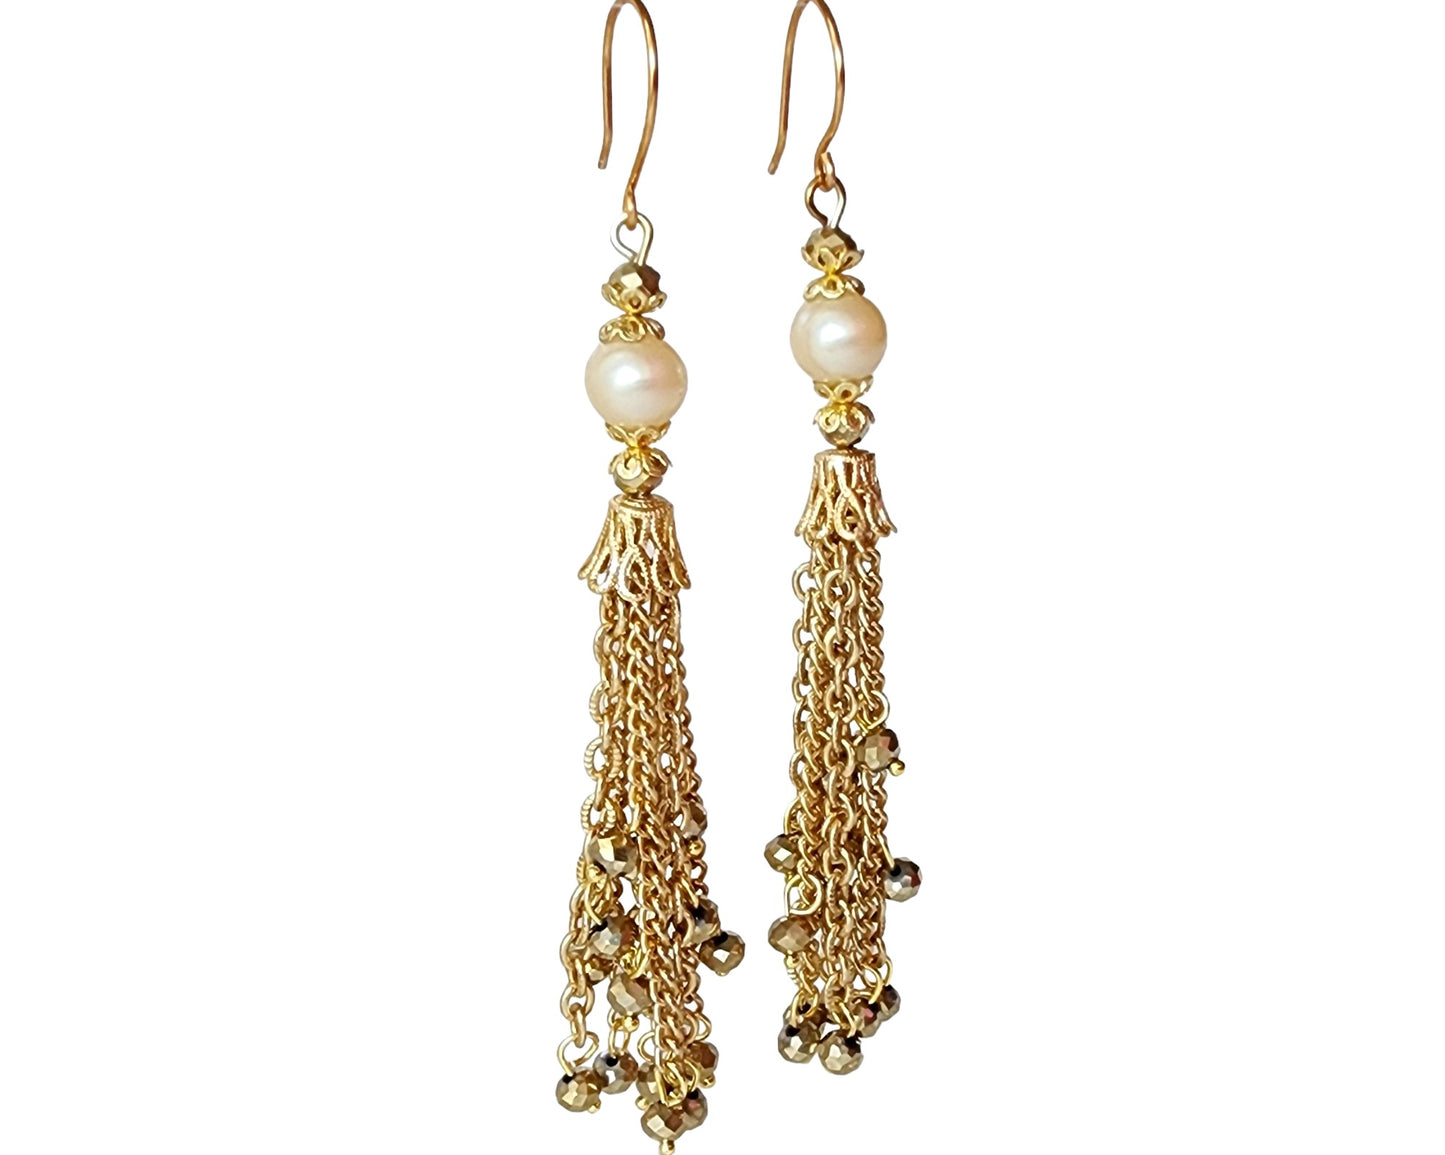 Long Art Deco Style Tassel Earrings, Tassel made with long strands of chains with gold crystals dangling below off white pearls. 